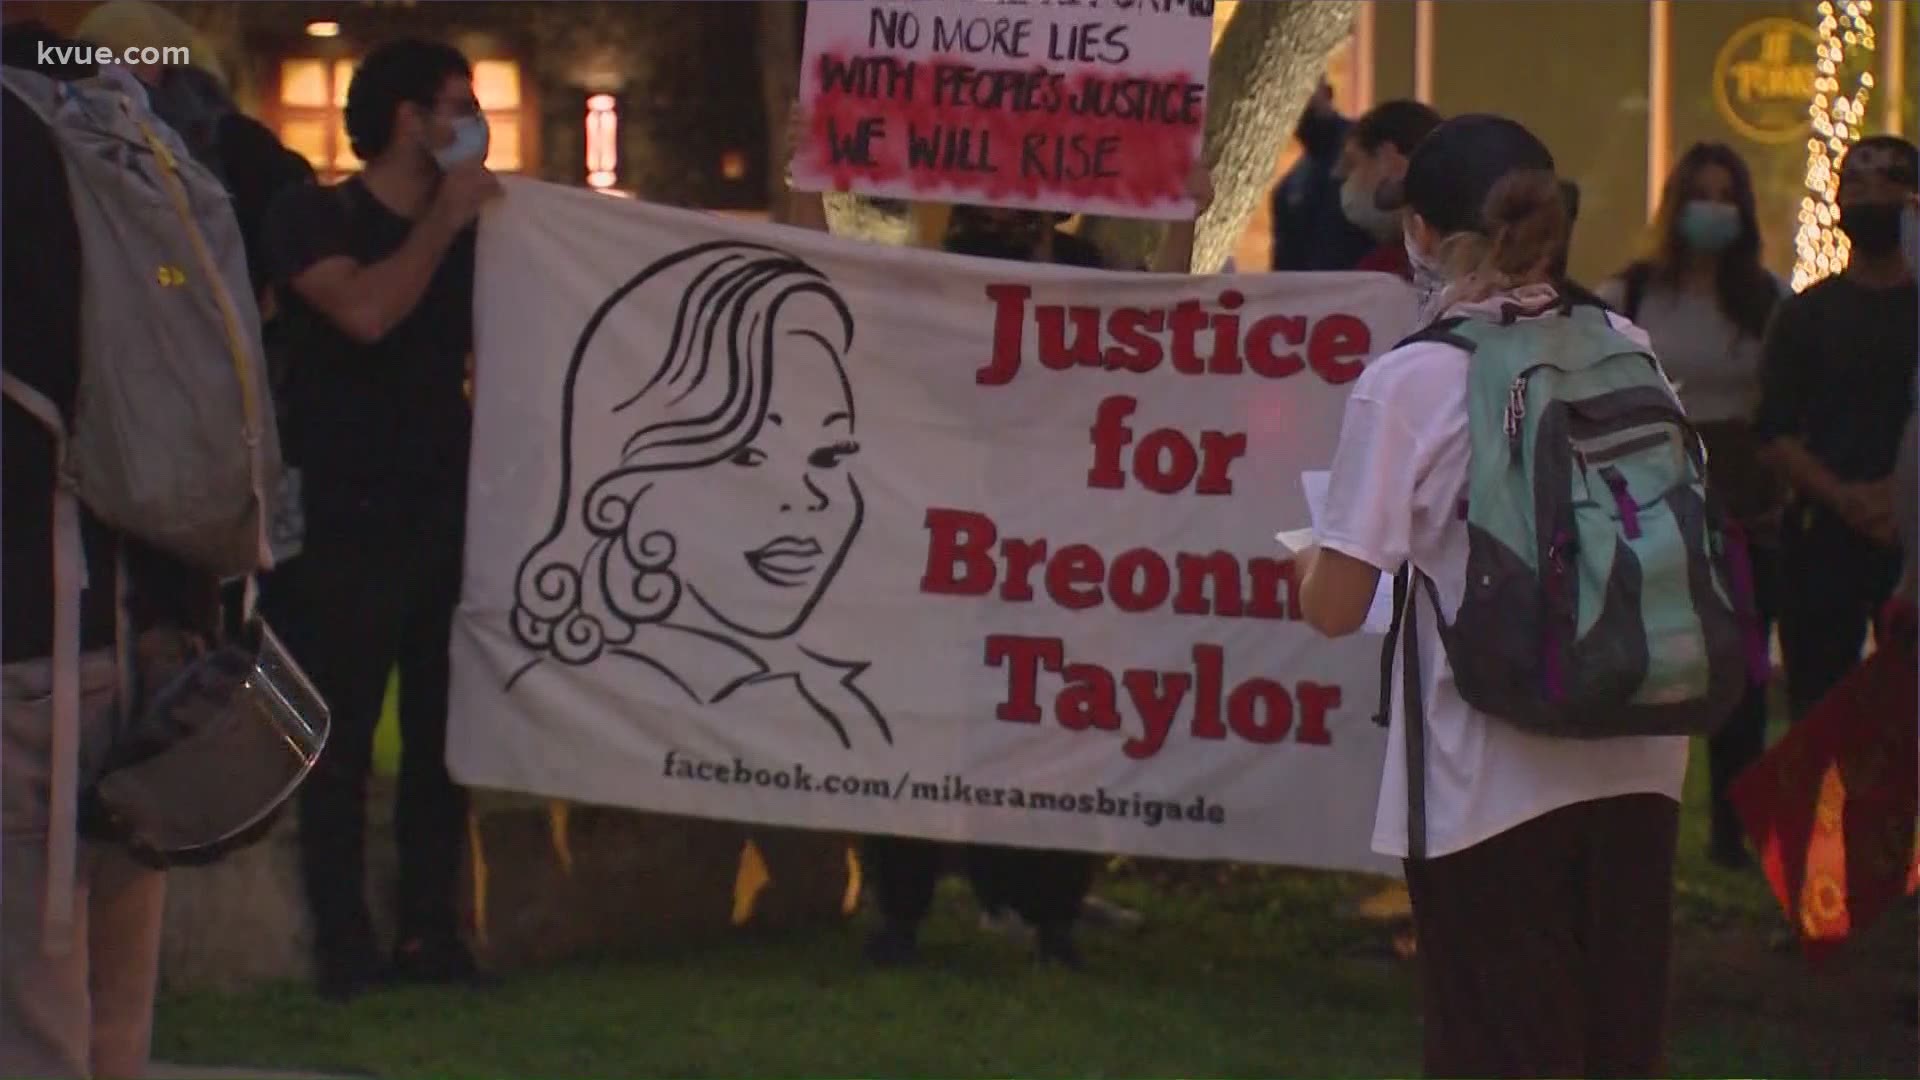 A group of demonstrators gathered in Downtown Austin Wednesday night to protest the indictment in the Breonna Taylor case.